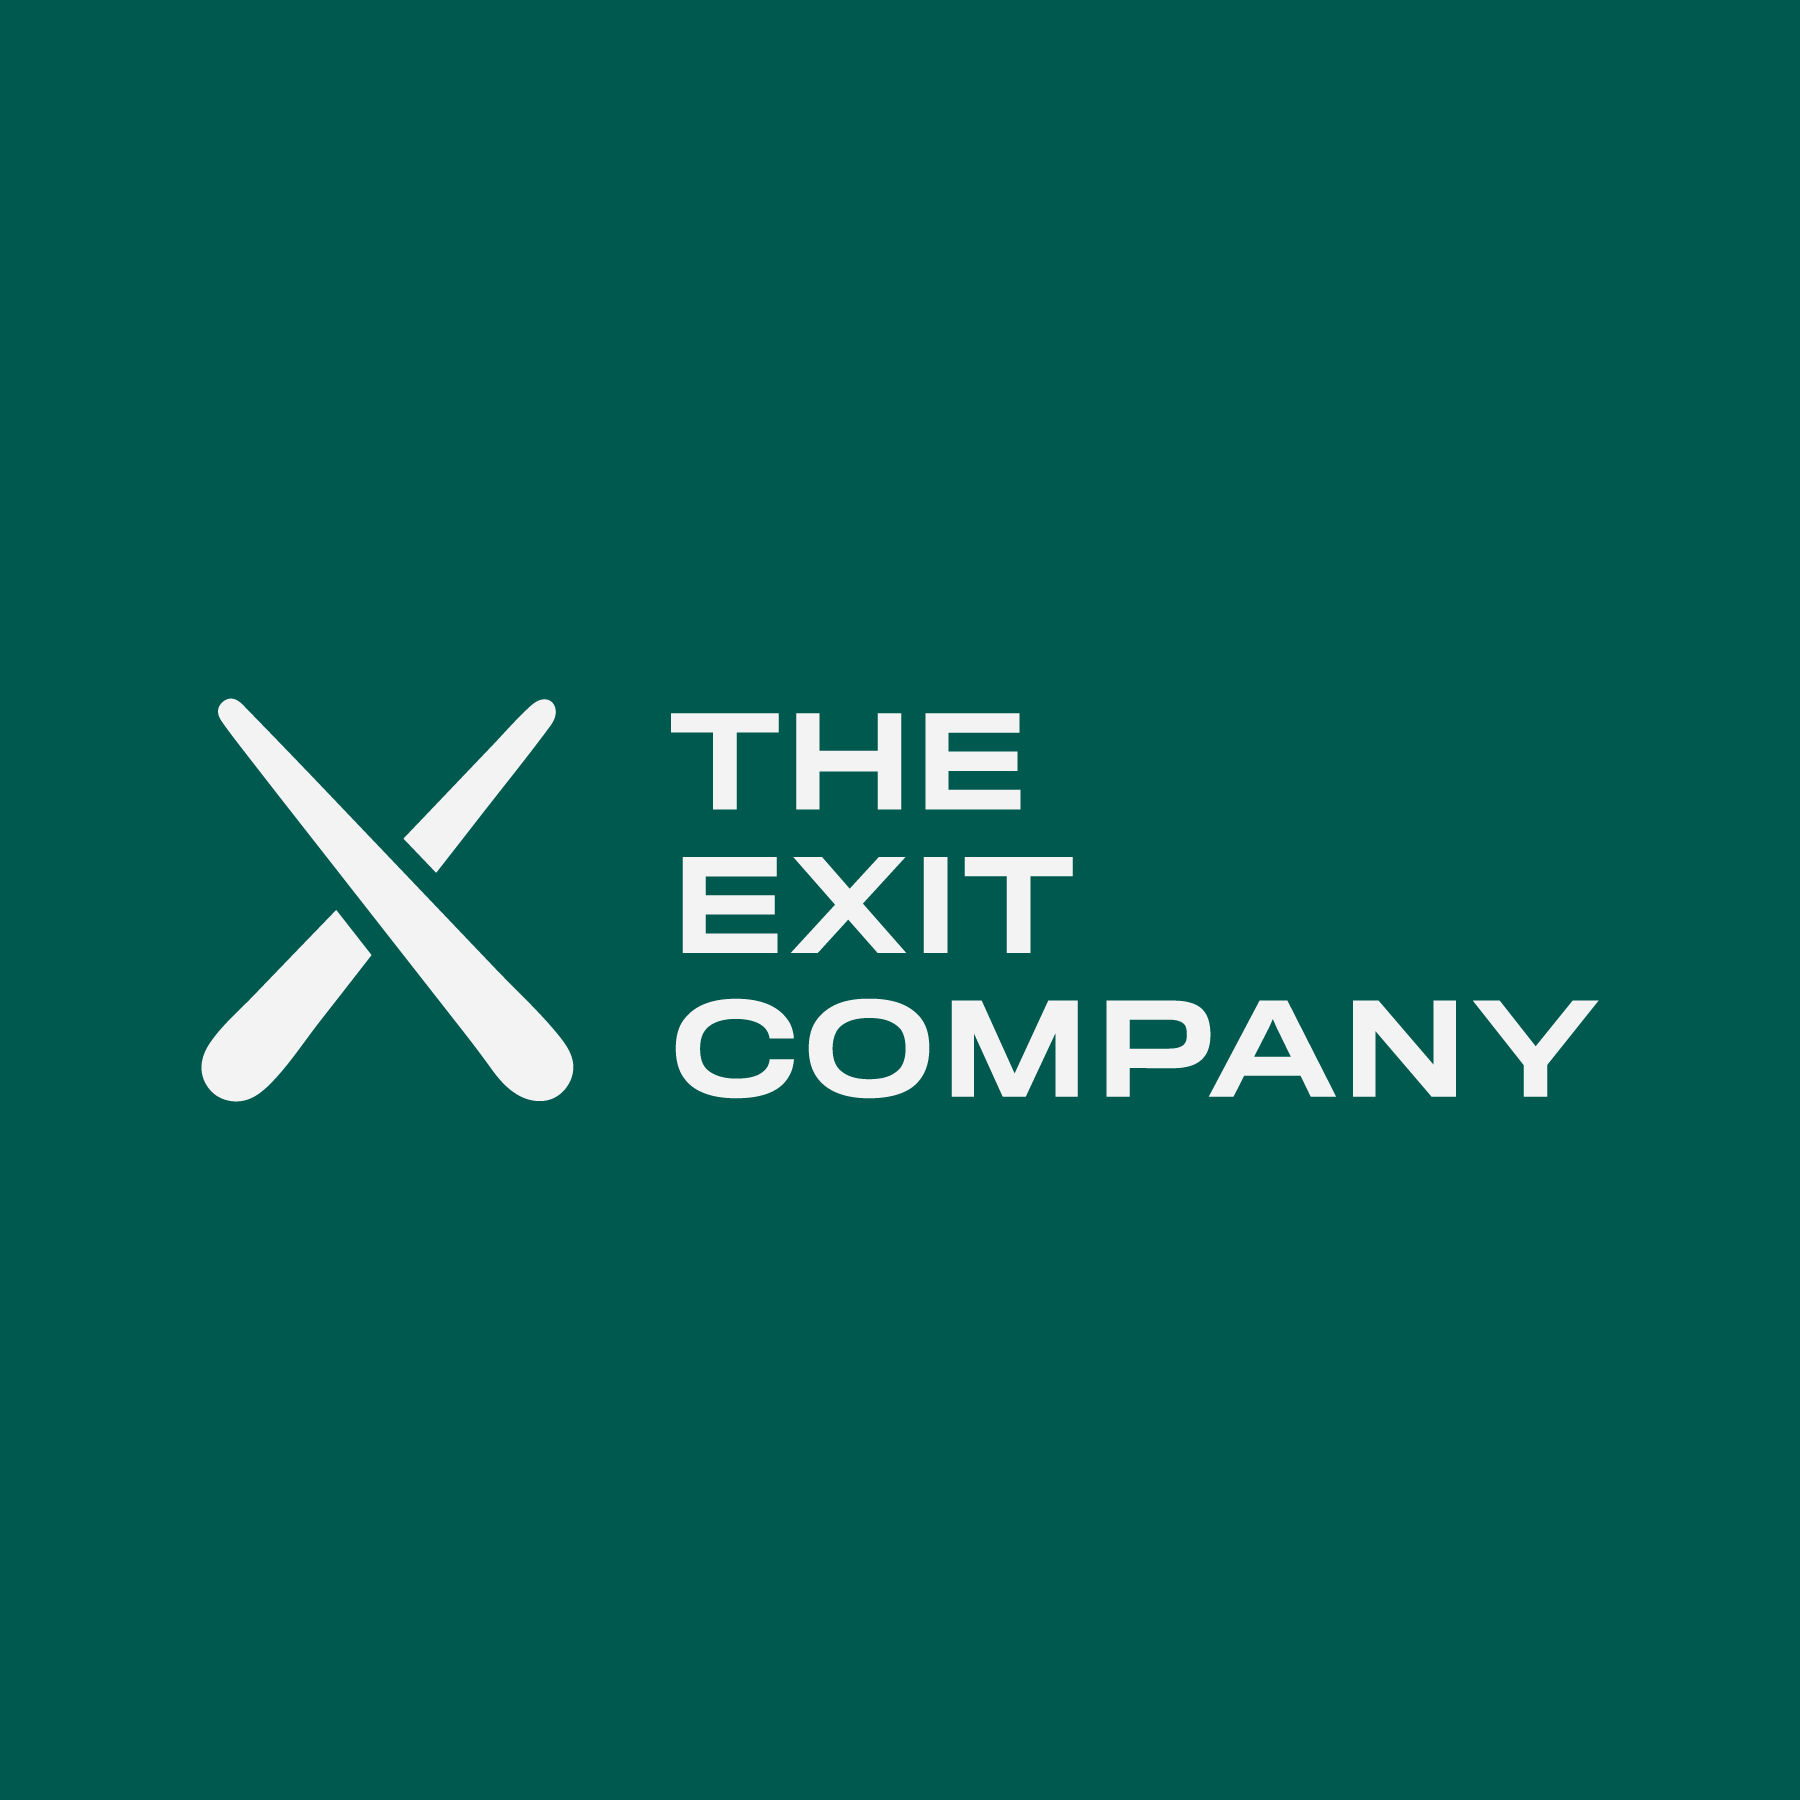 The Exit Company